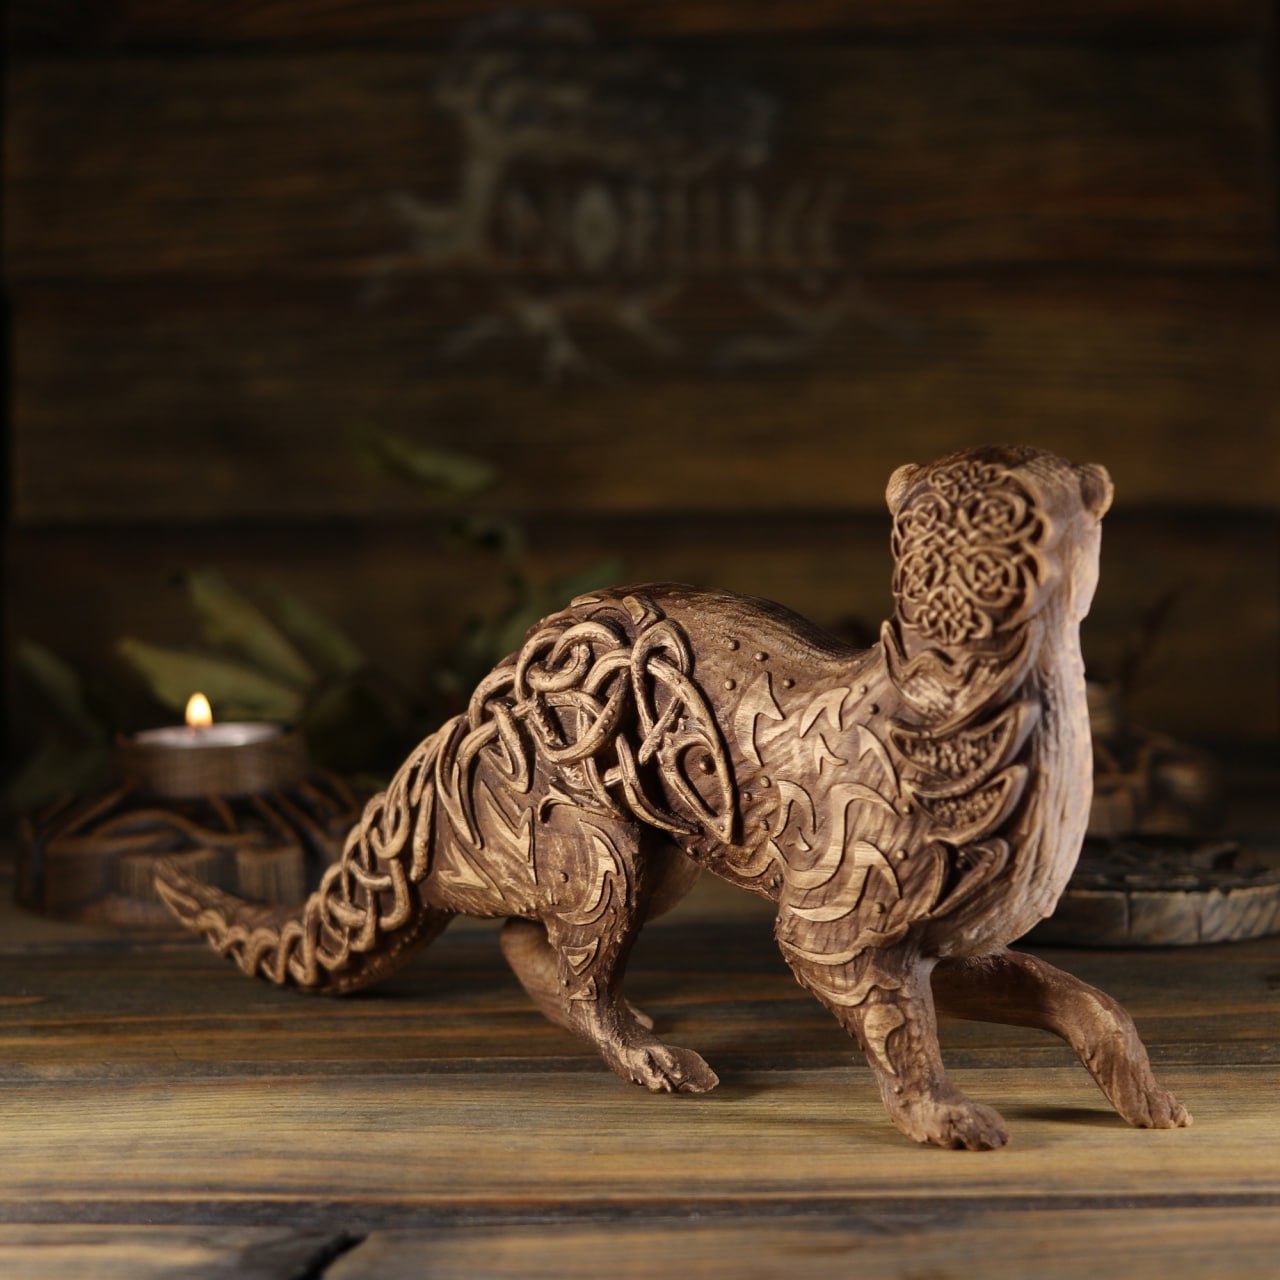 The Enchanting Wooden Otter Sculpture: A Bridge Between Celtic and Norse Mythology